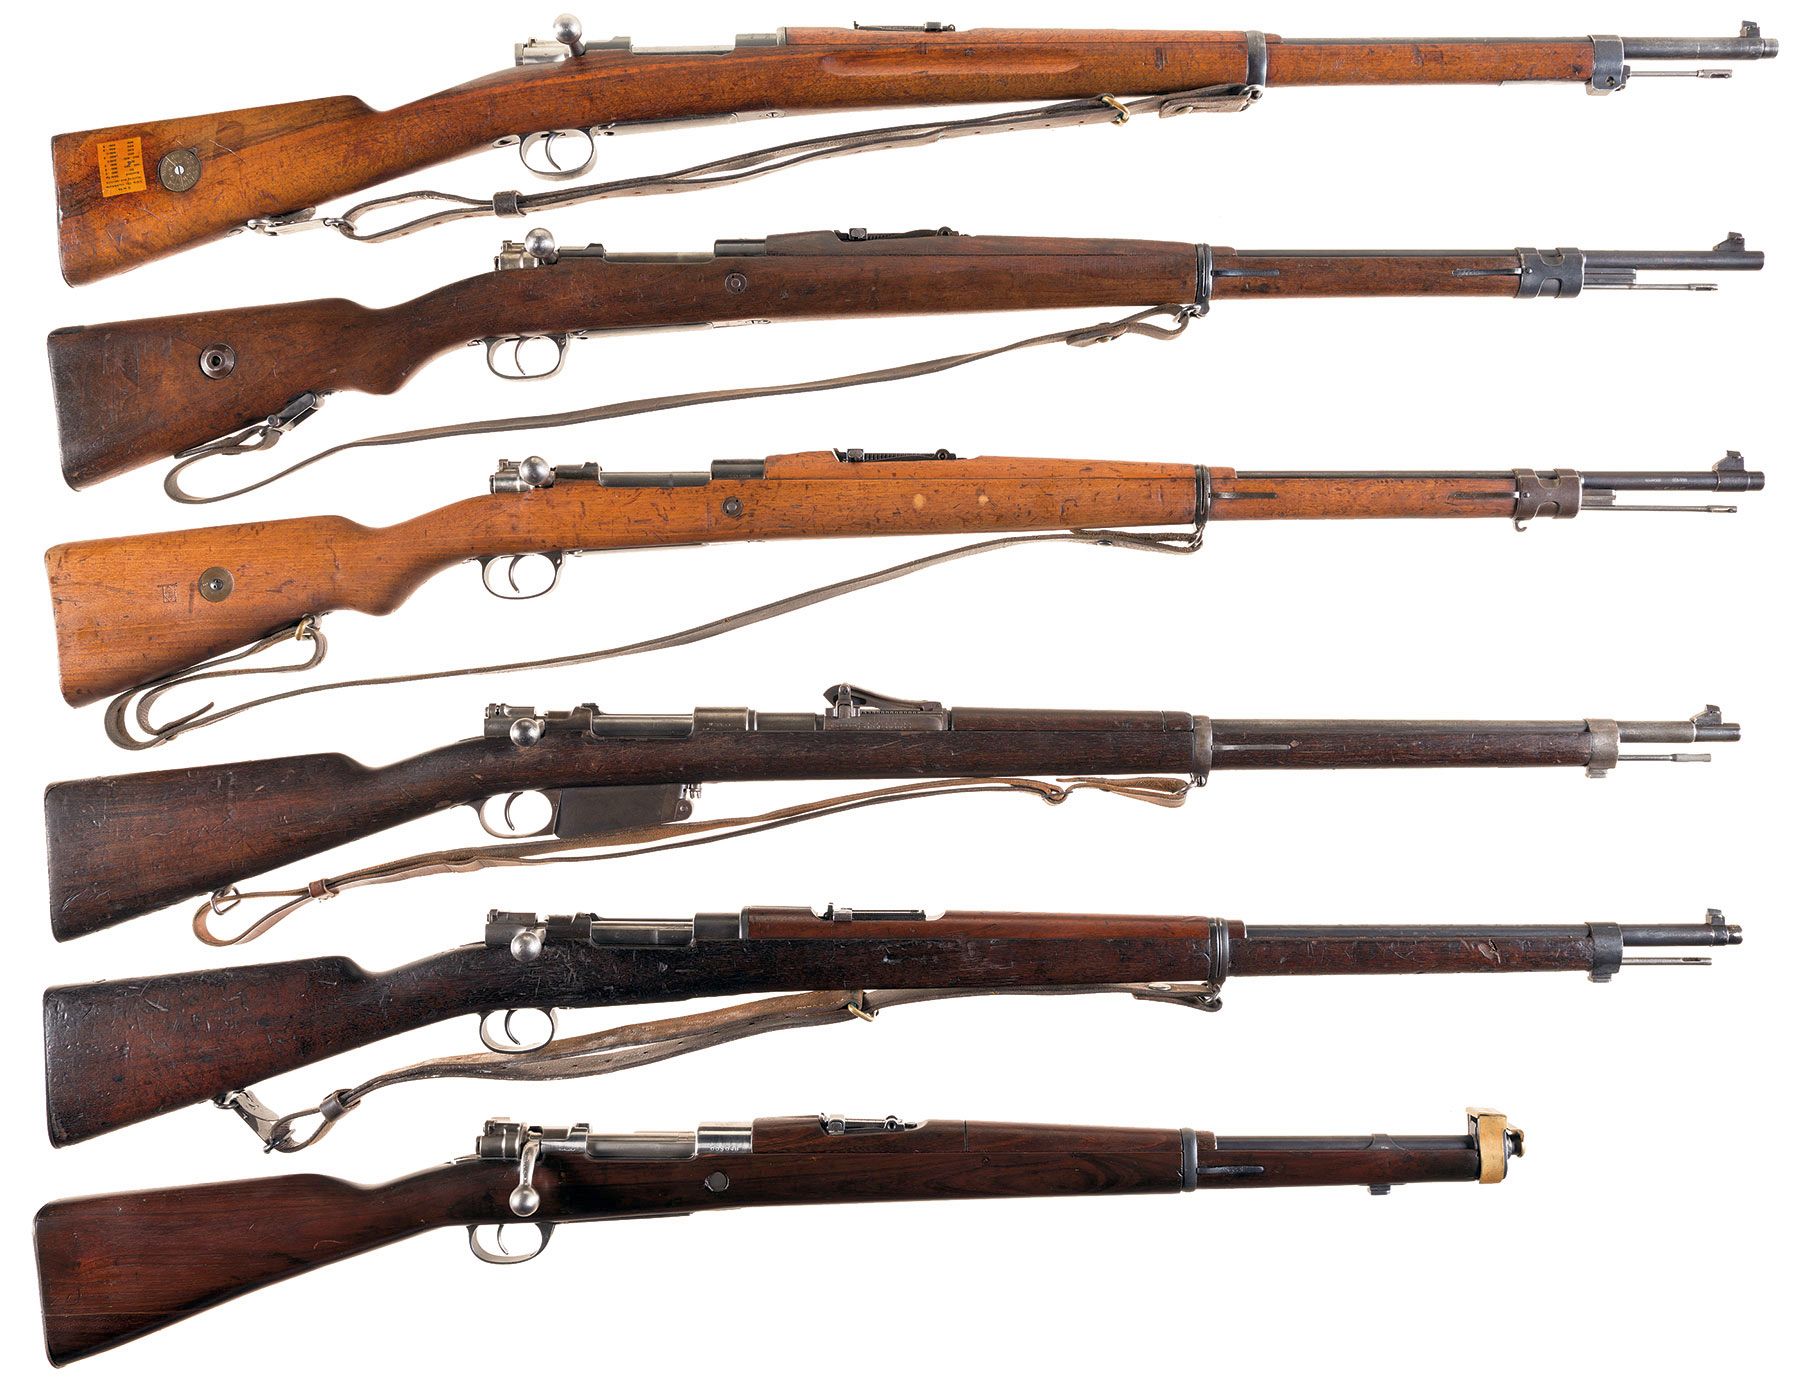 Six Bolt Action Military Rifles A Mauser Swedish Contract Mode Rock Island Auction